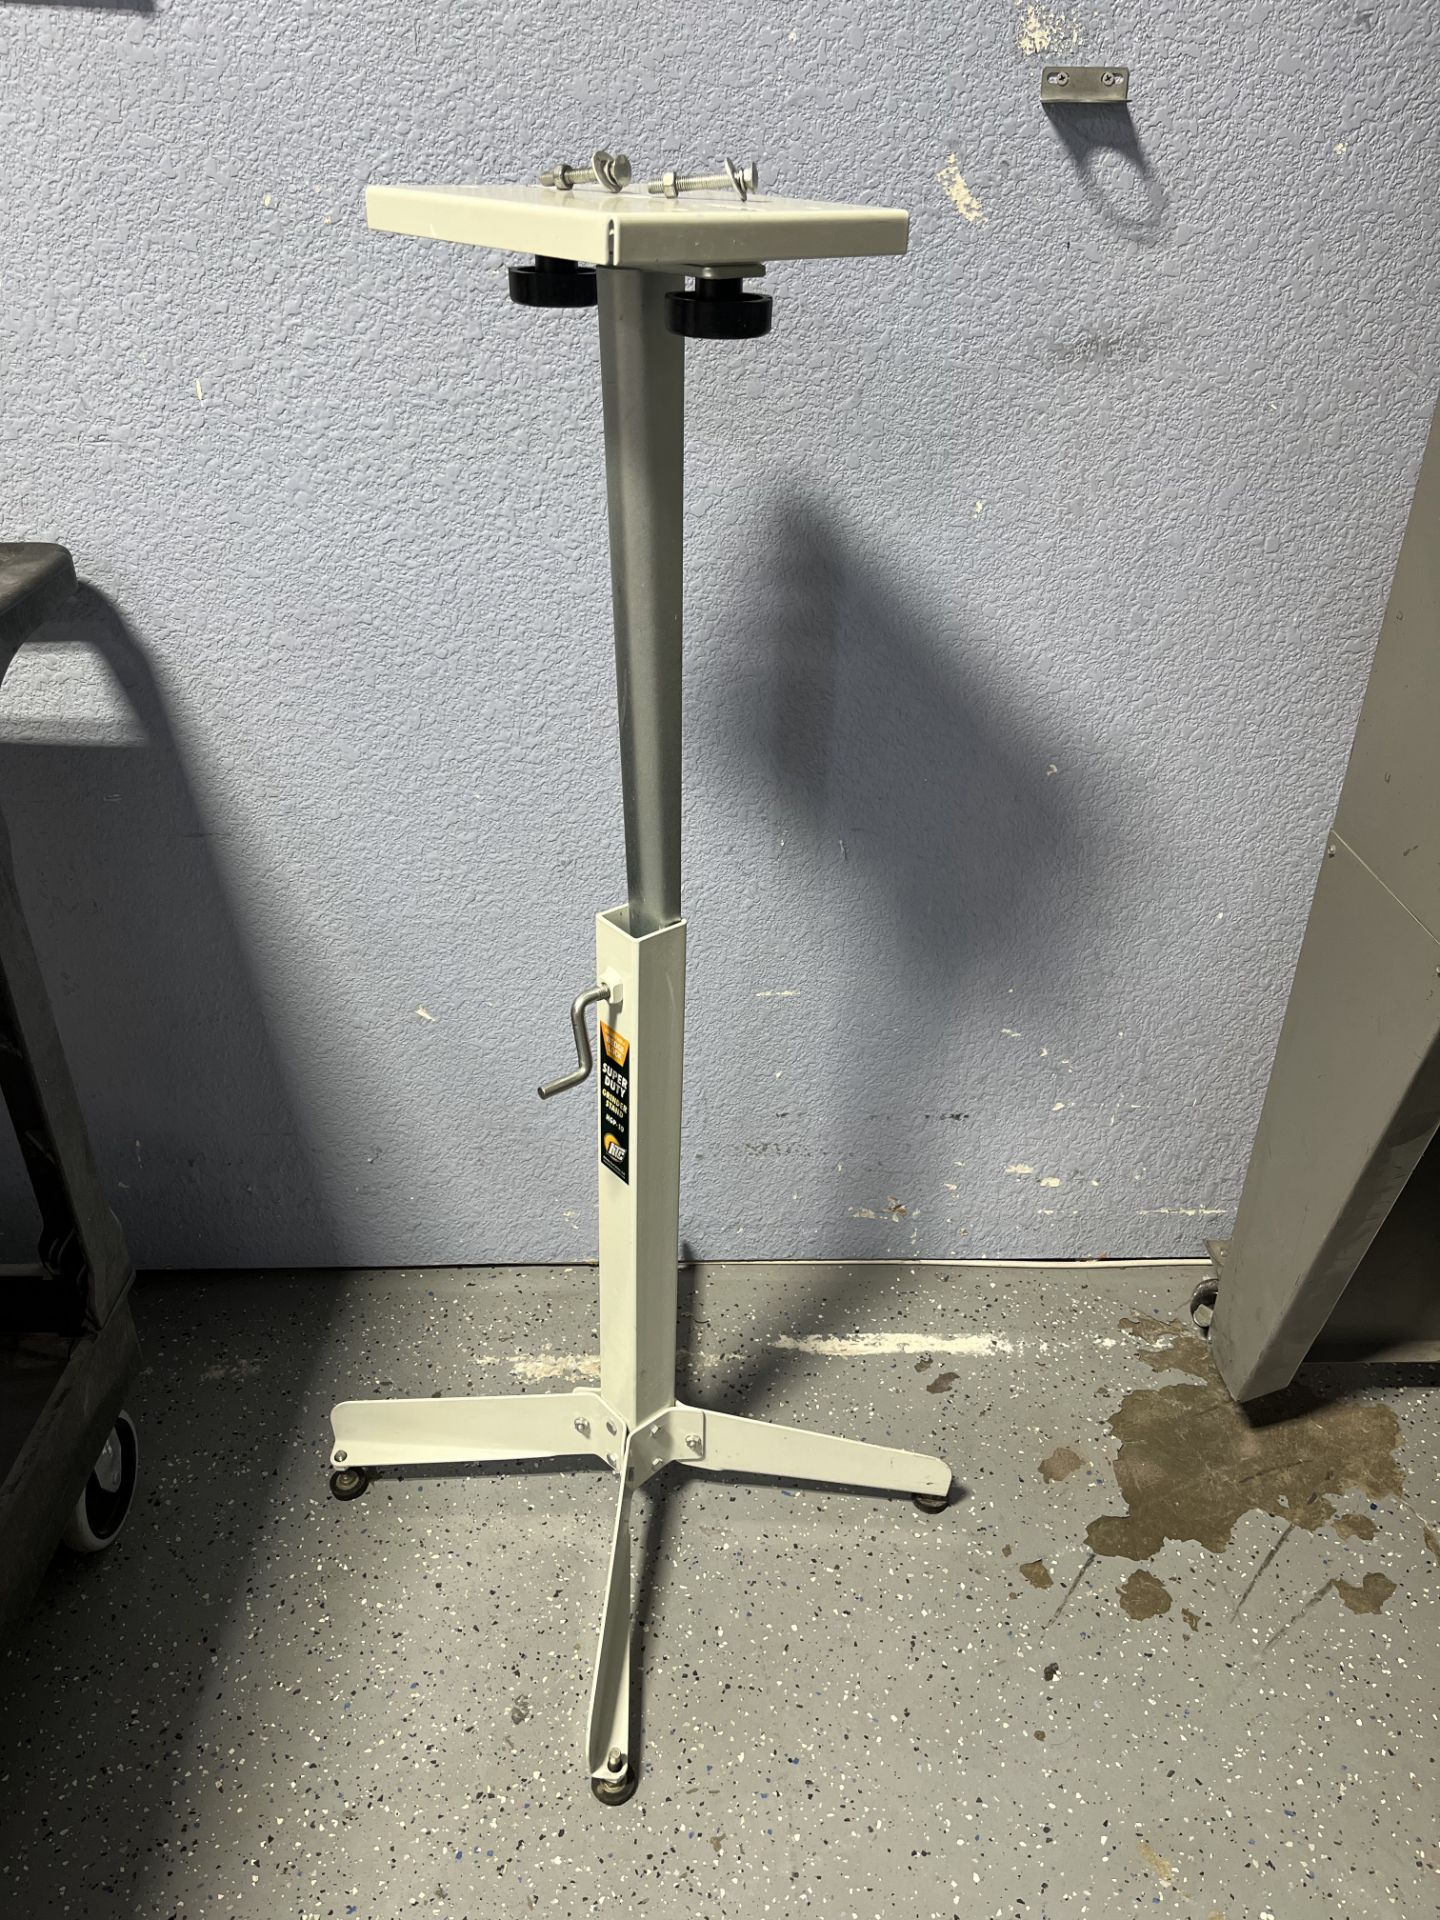 Grinder stand, Adjustable height 26.5" - 44", per customer excellent condition - Image 2 of 2